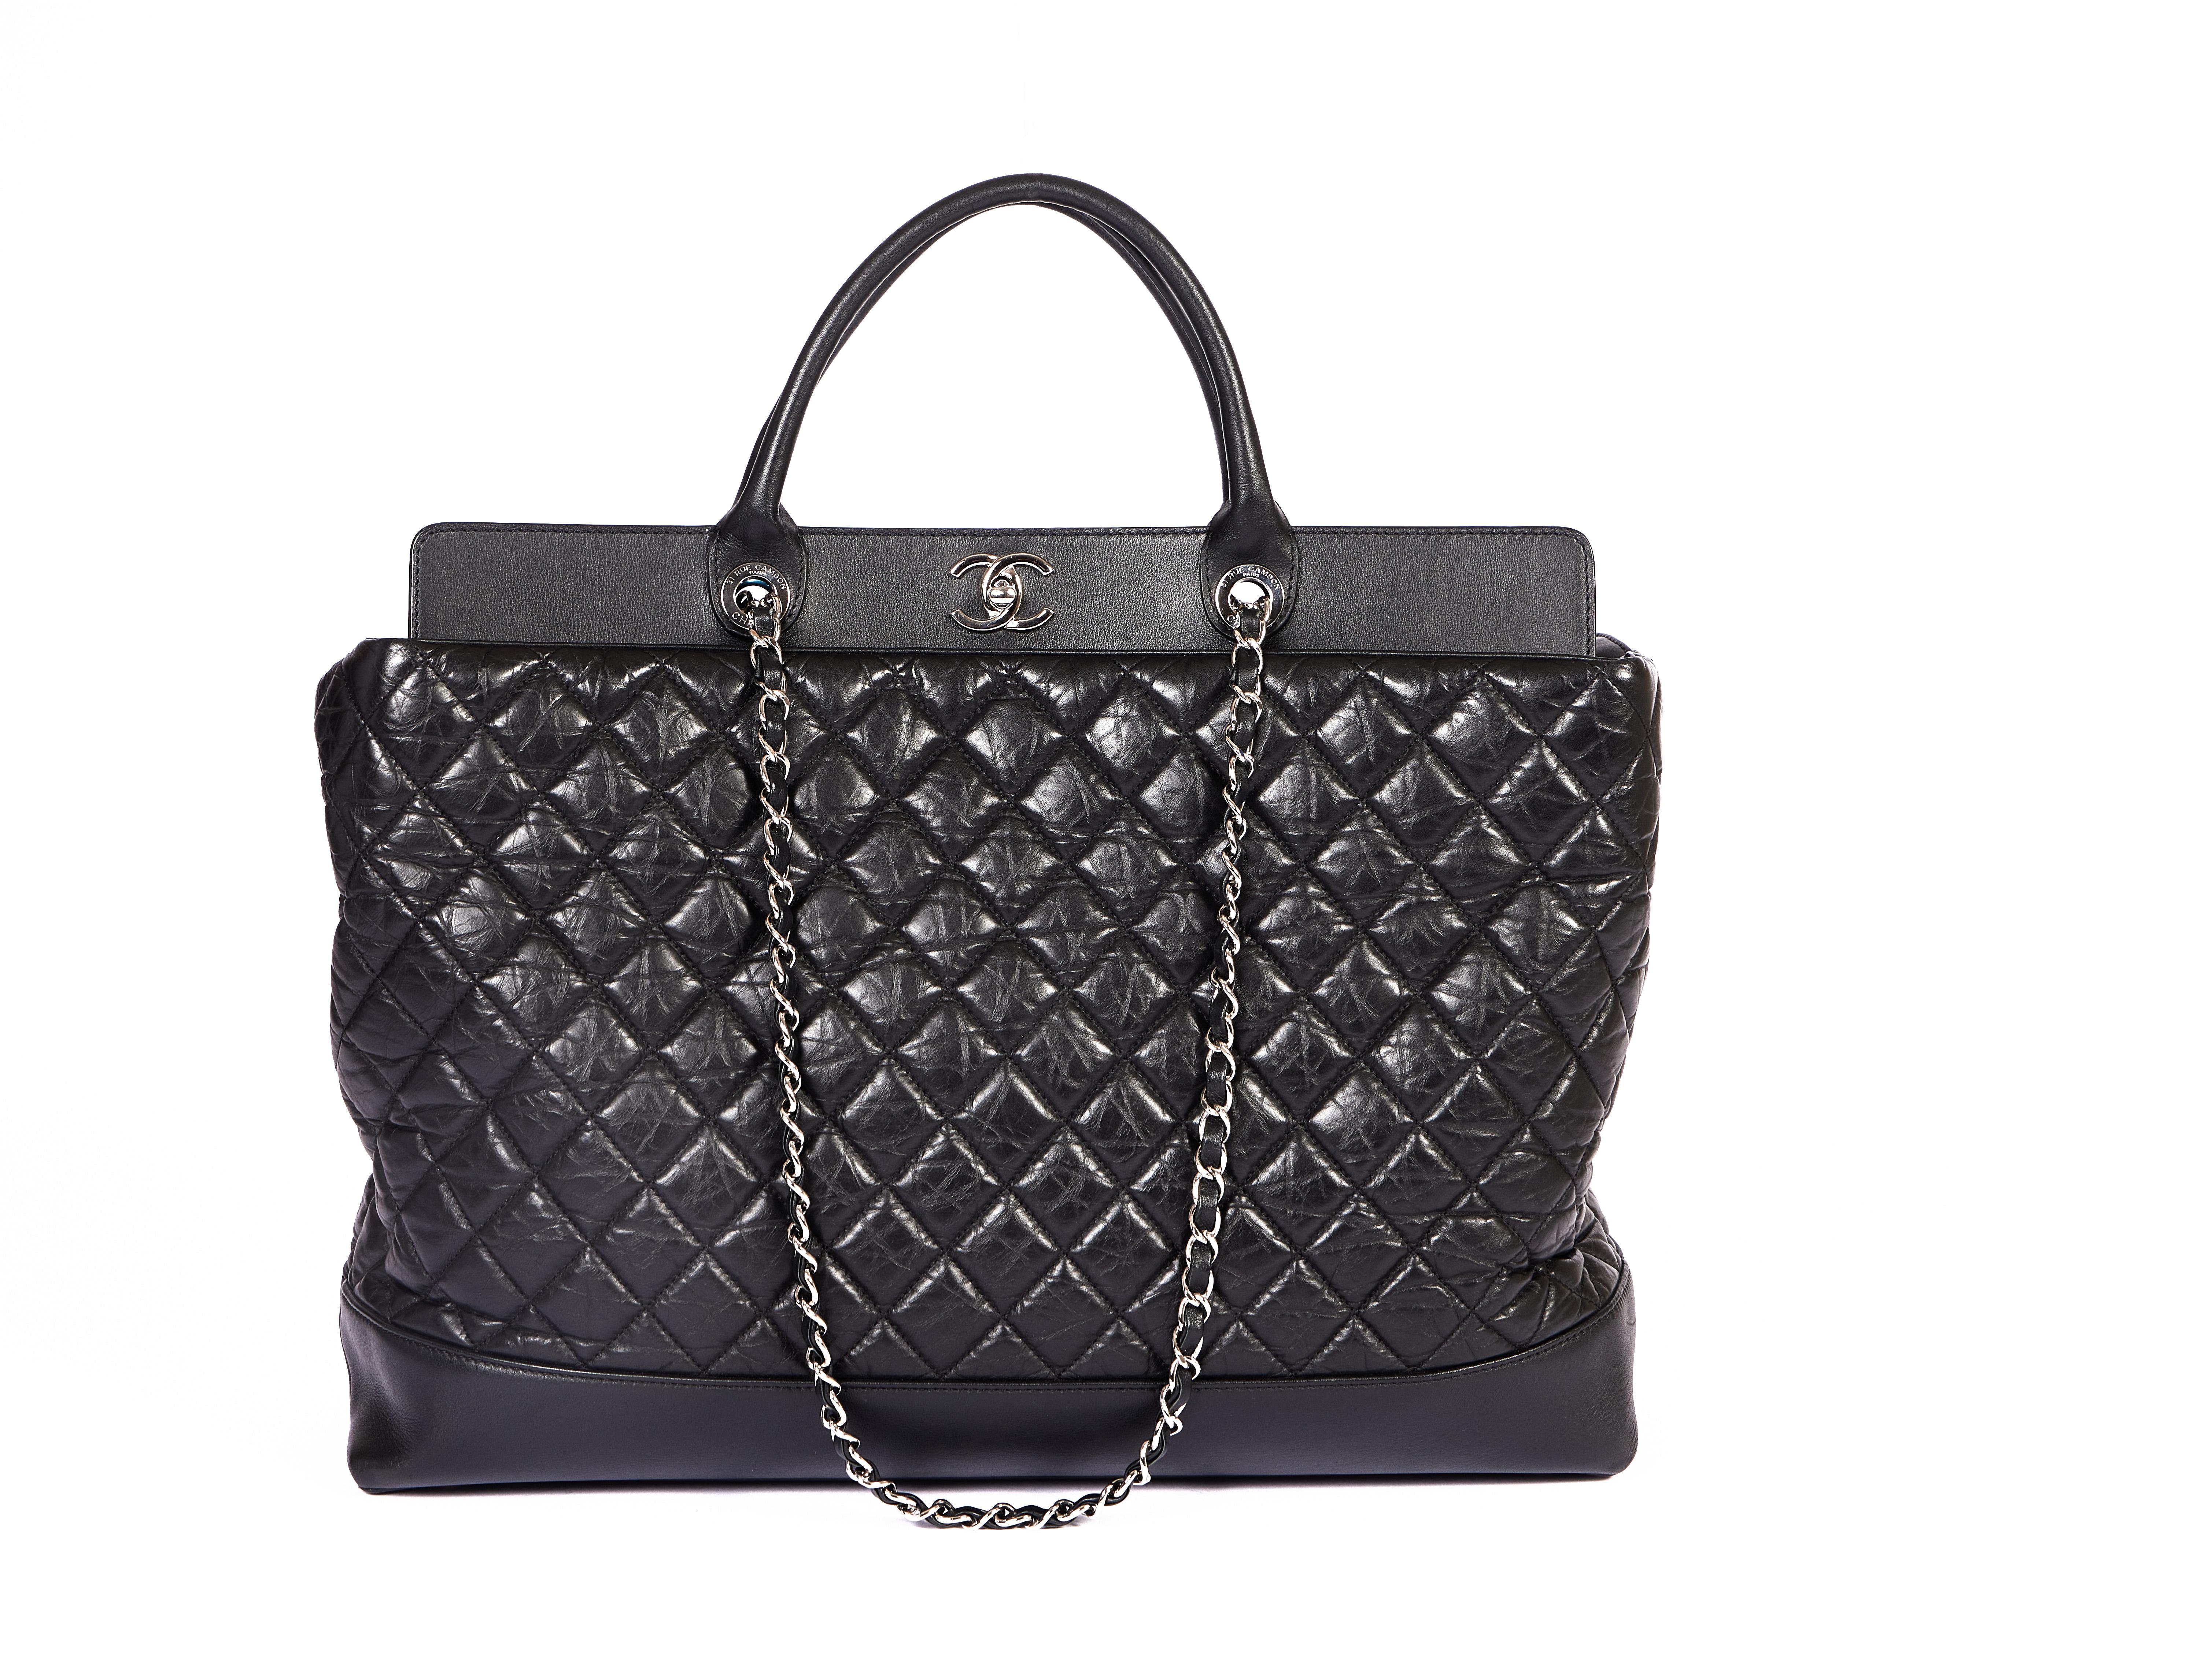 This super soft quilted lambskin leather bag from Chanel looks super elegant with the business outfit as well as the casual jeans look. Oversize and versatile with 2 way handles. It has handles as well as chains to wear it over your shoulders. It